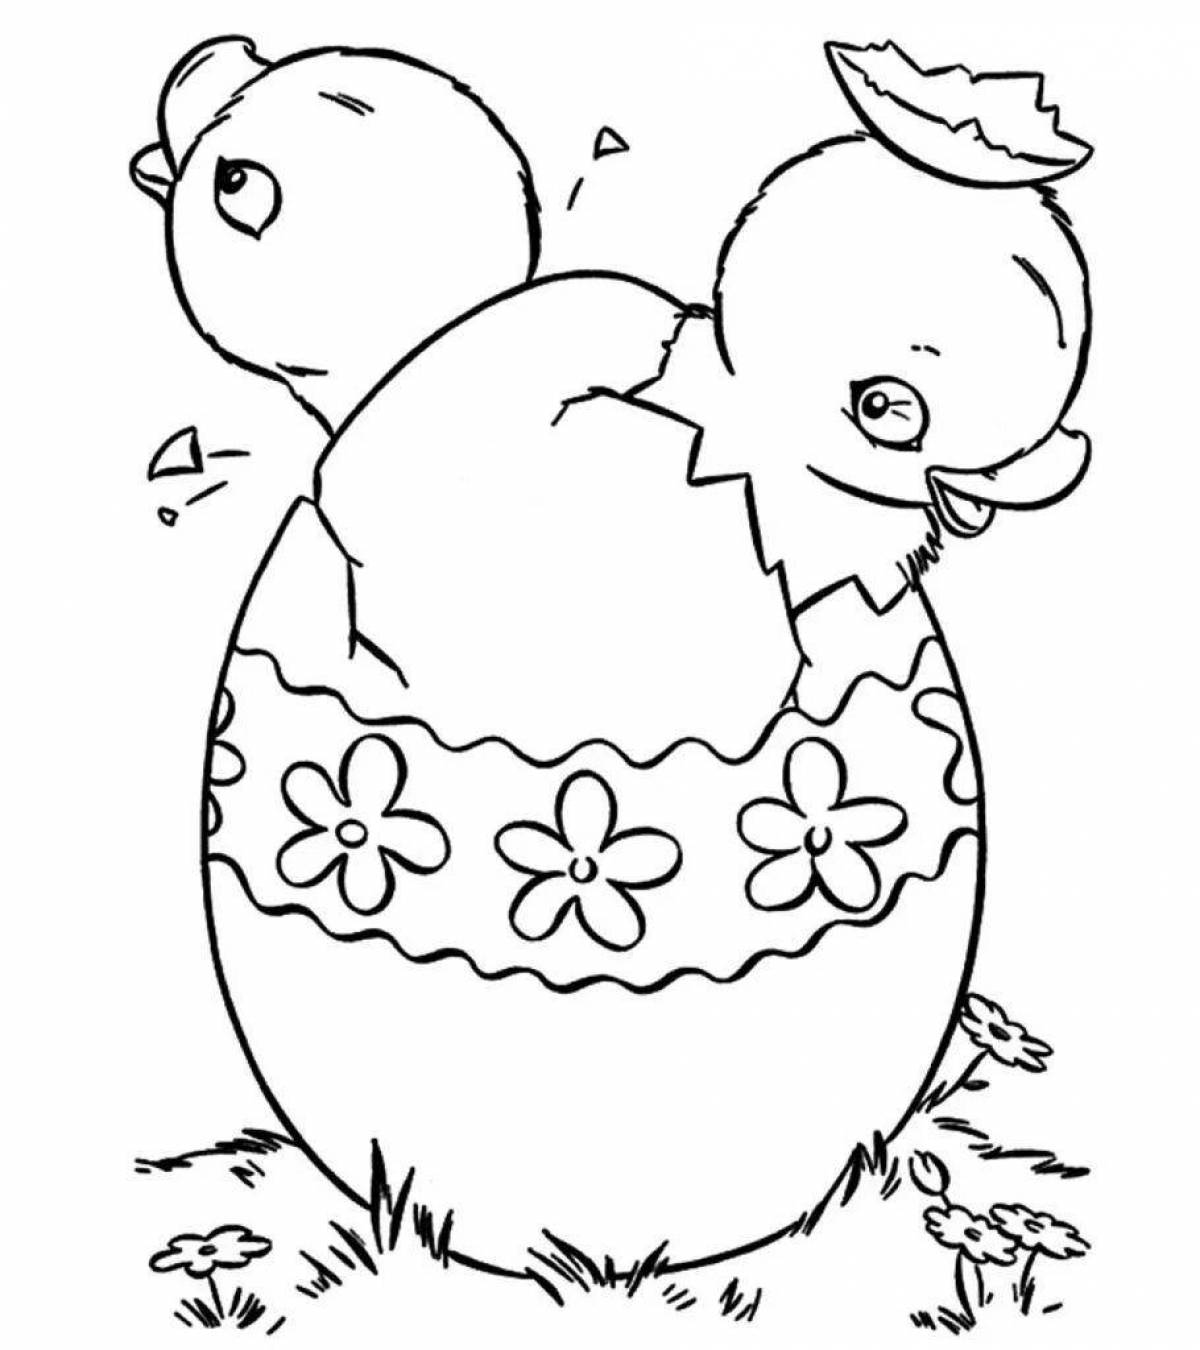 Glowing chicken in egg coloring page